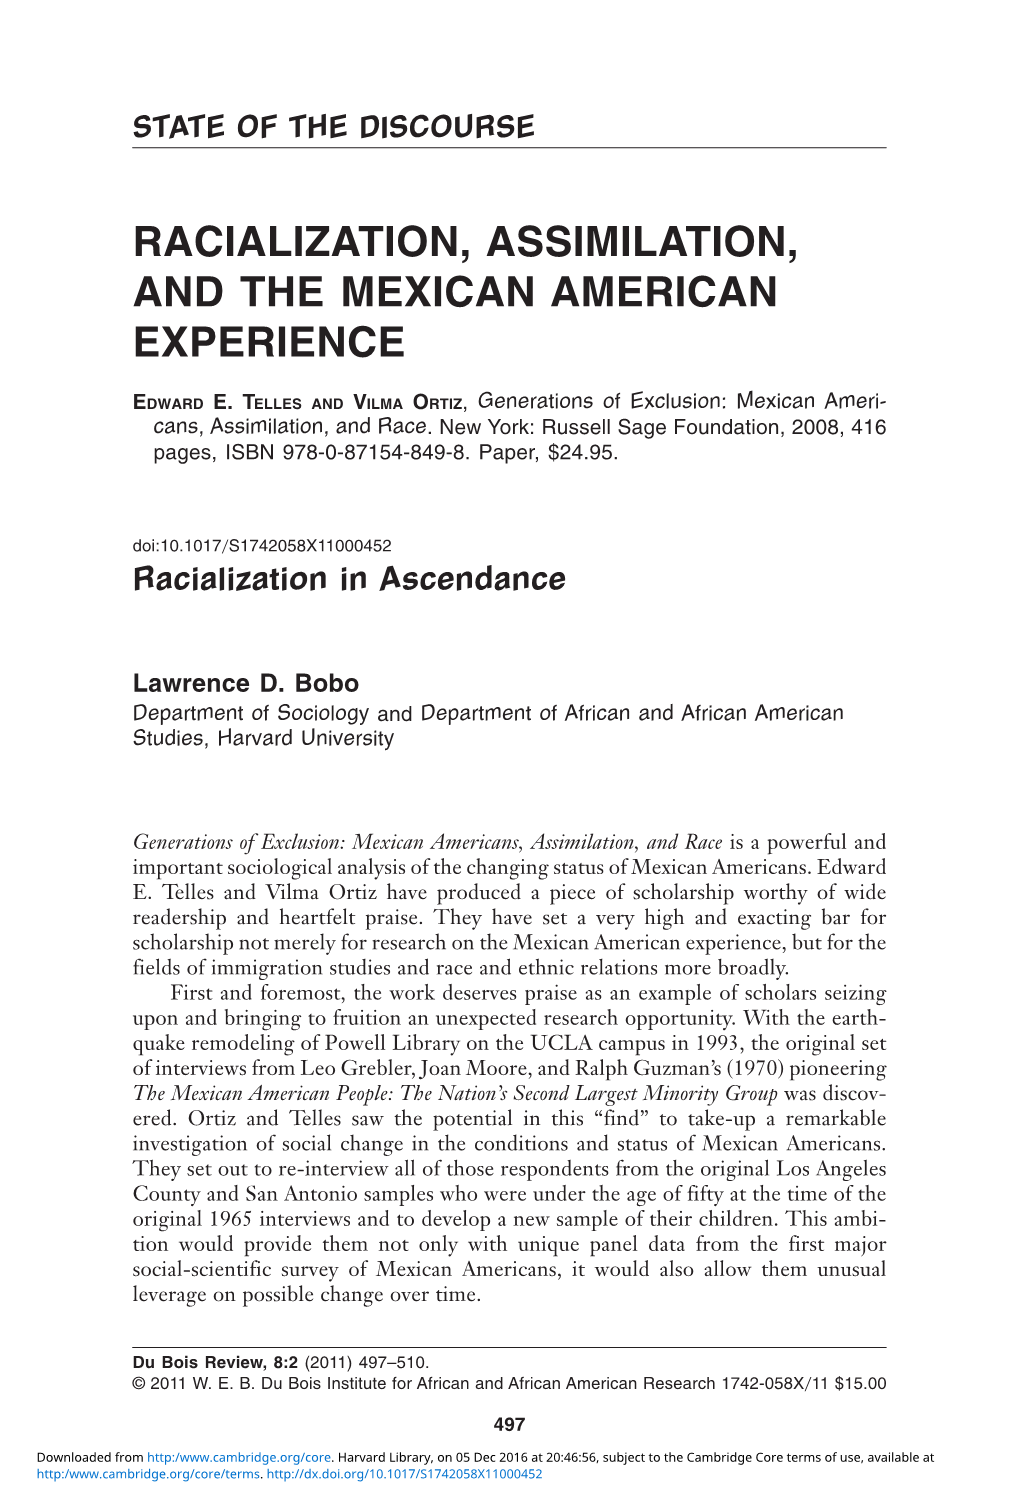 Racialization, Assimilation, and the Mexican American Experience